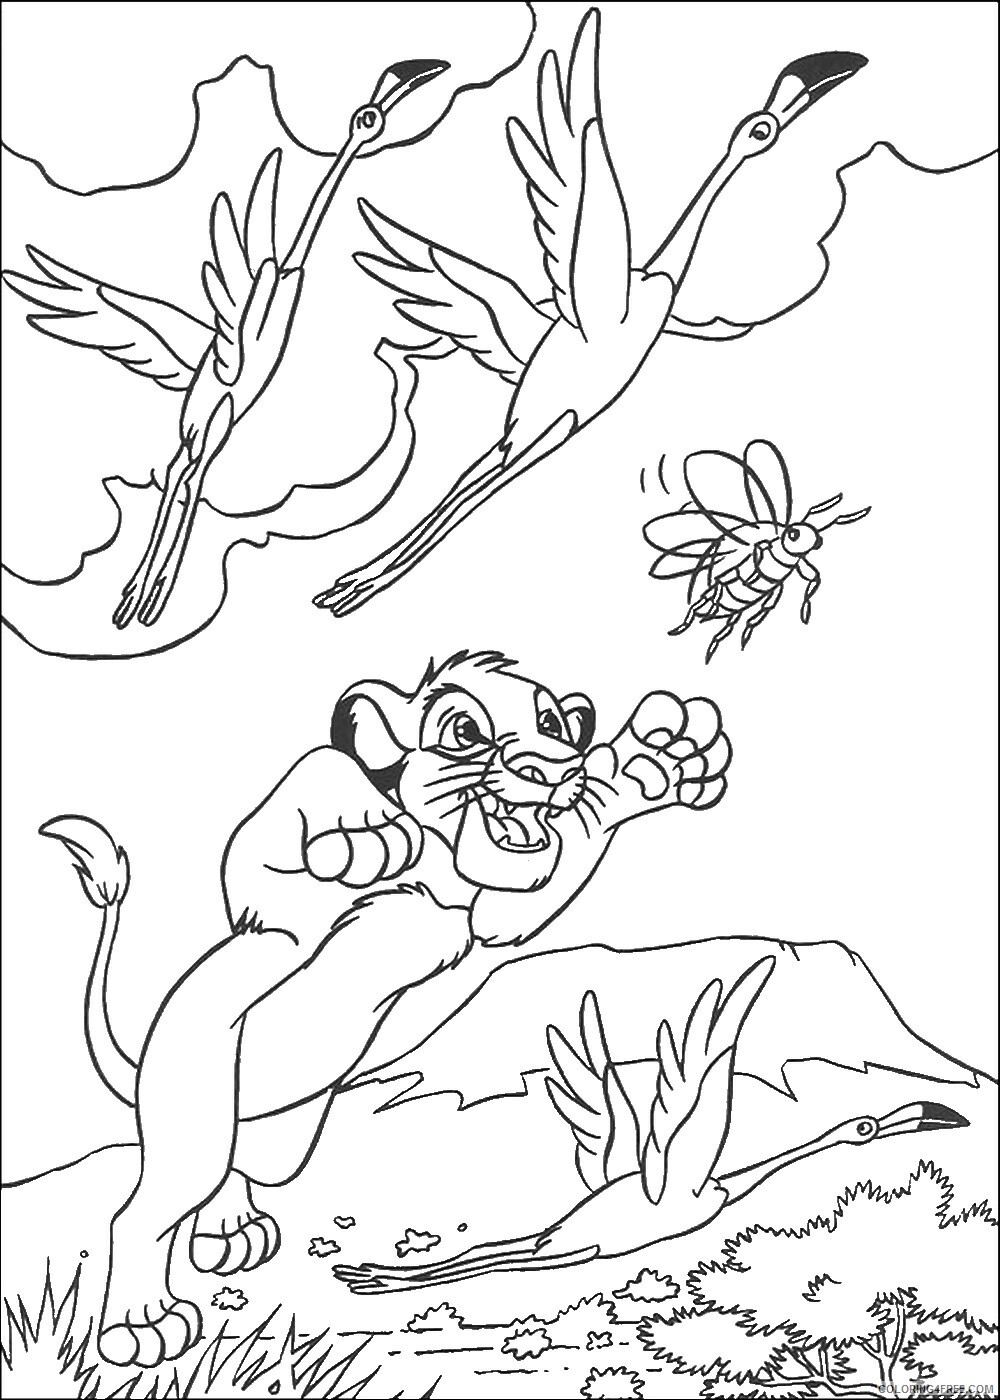 The Lion King Coloring Pages TV Film lionking_28 Printable 2020 09157 Coloring4free